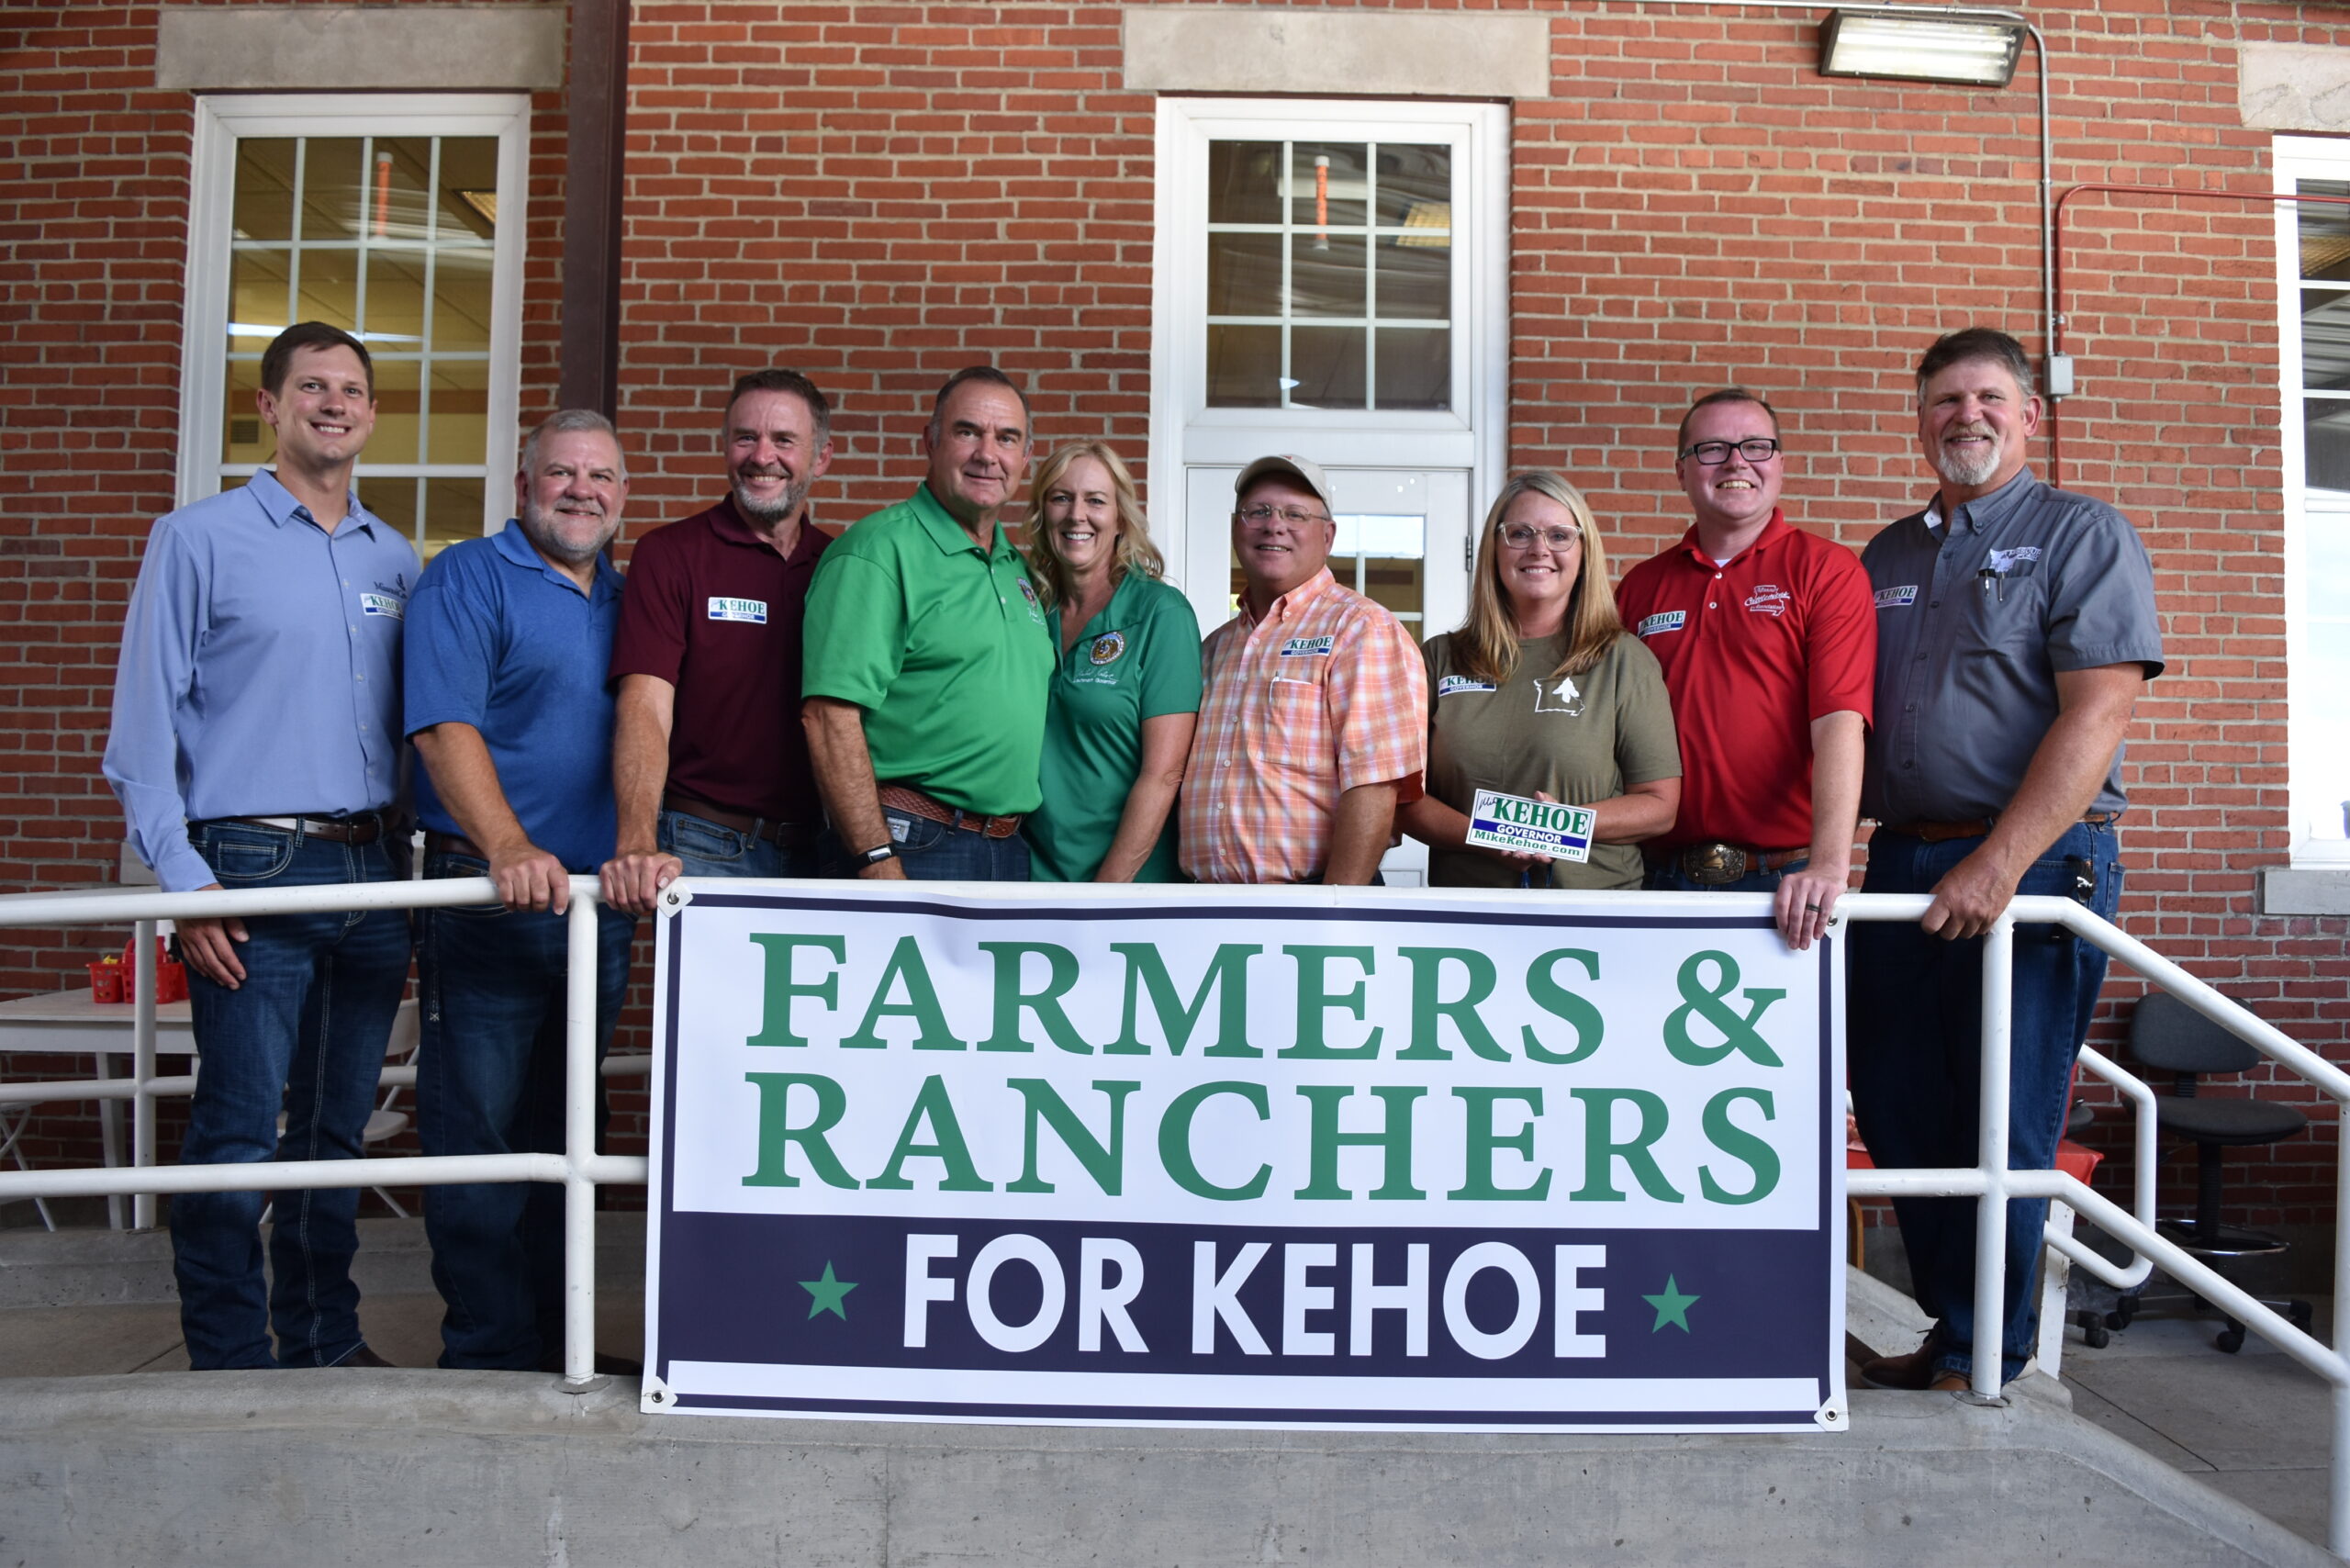 Farmer pose for photo with governor candidate, Mike Kehoe.